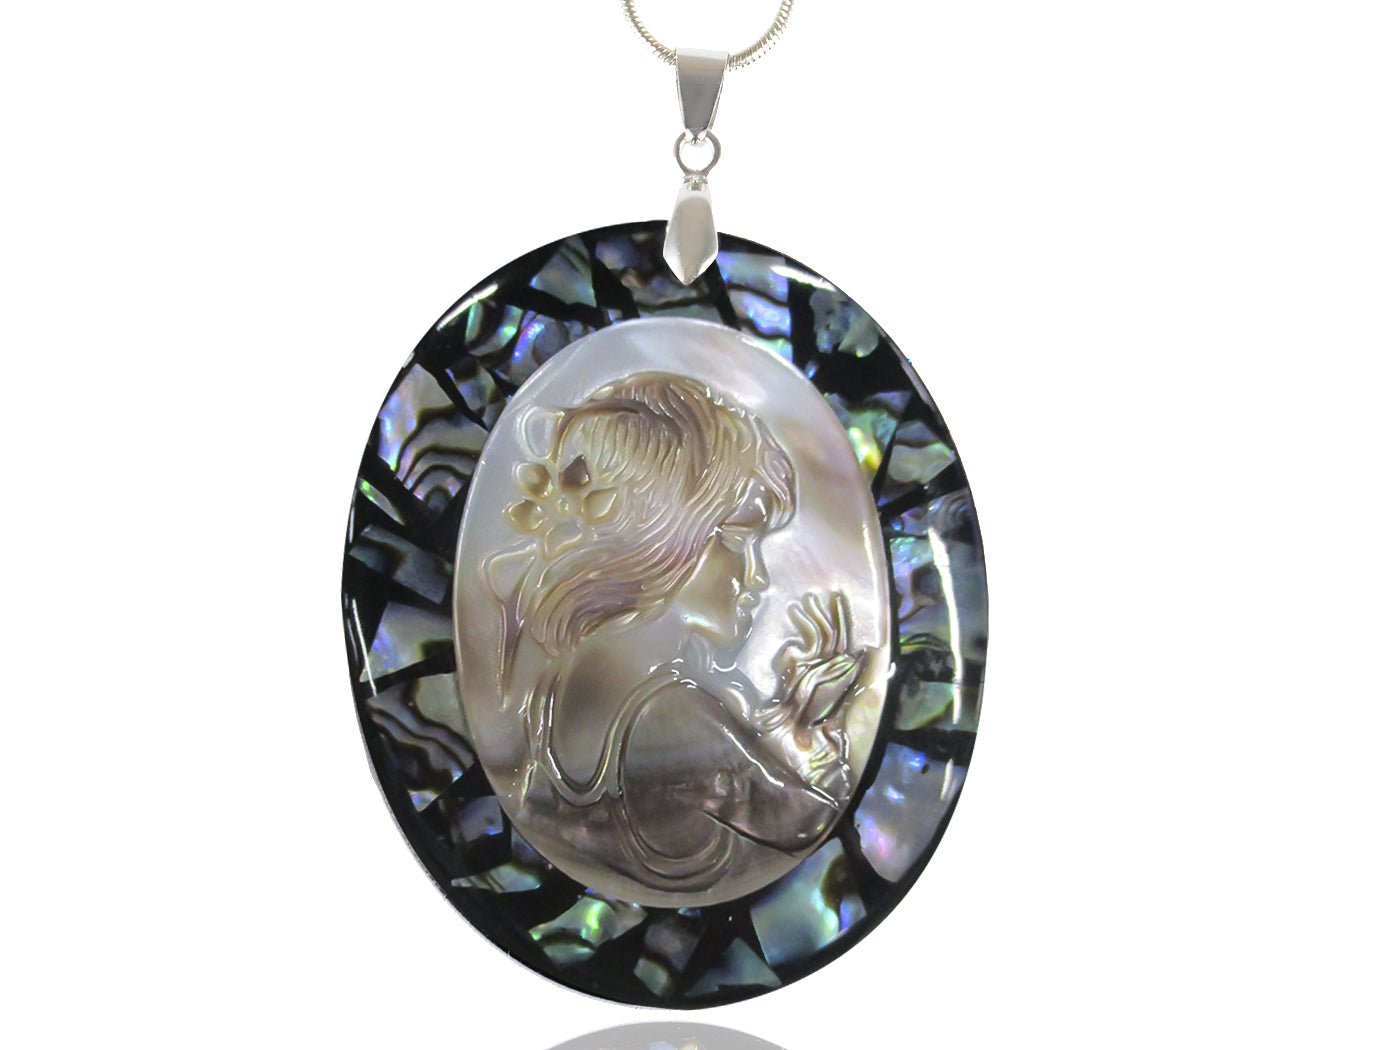 Rainbow Abalone Colored Shell Cameo Lady Princess Maiden Pendant Necklace